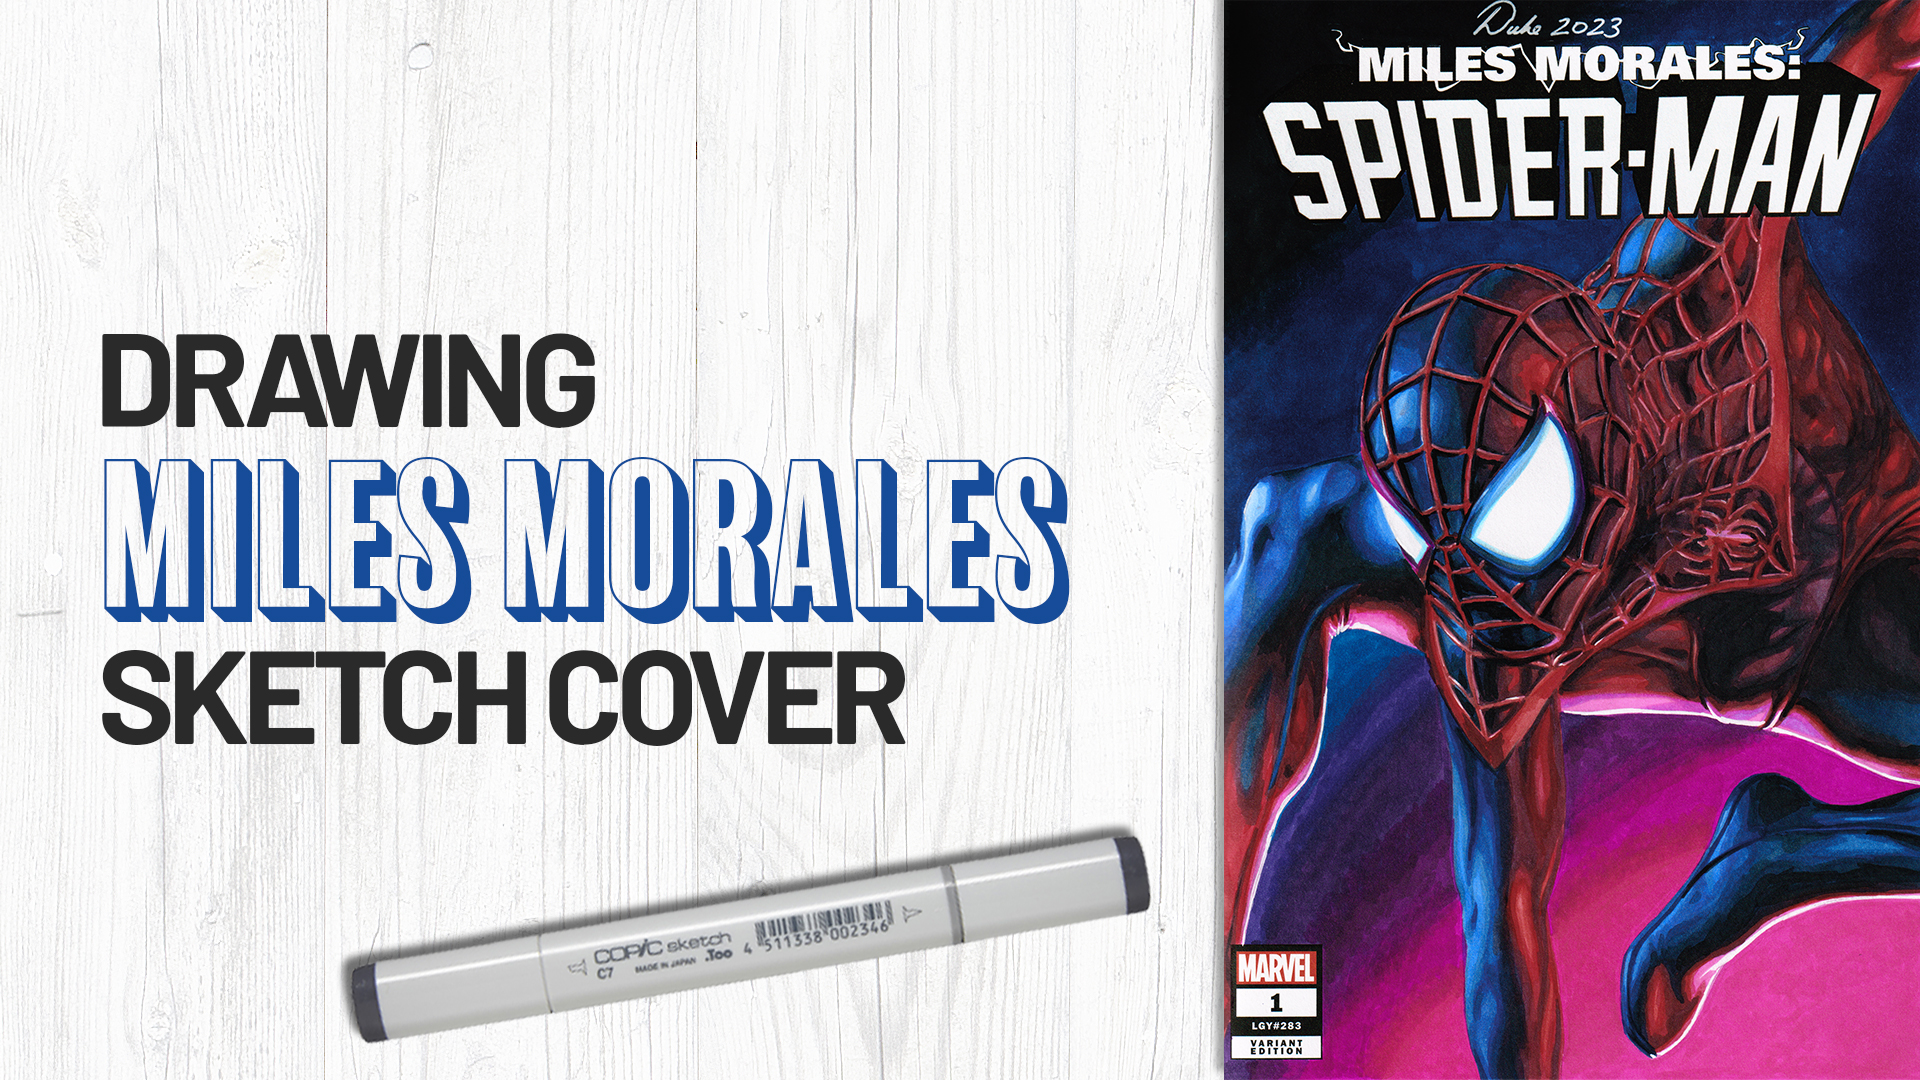 Drawing Miles Morales: Spider-Man Sketch Cover by Duke